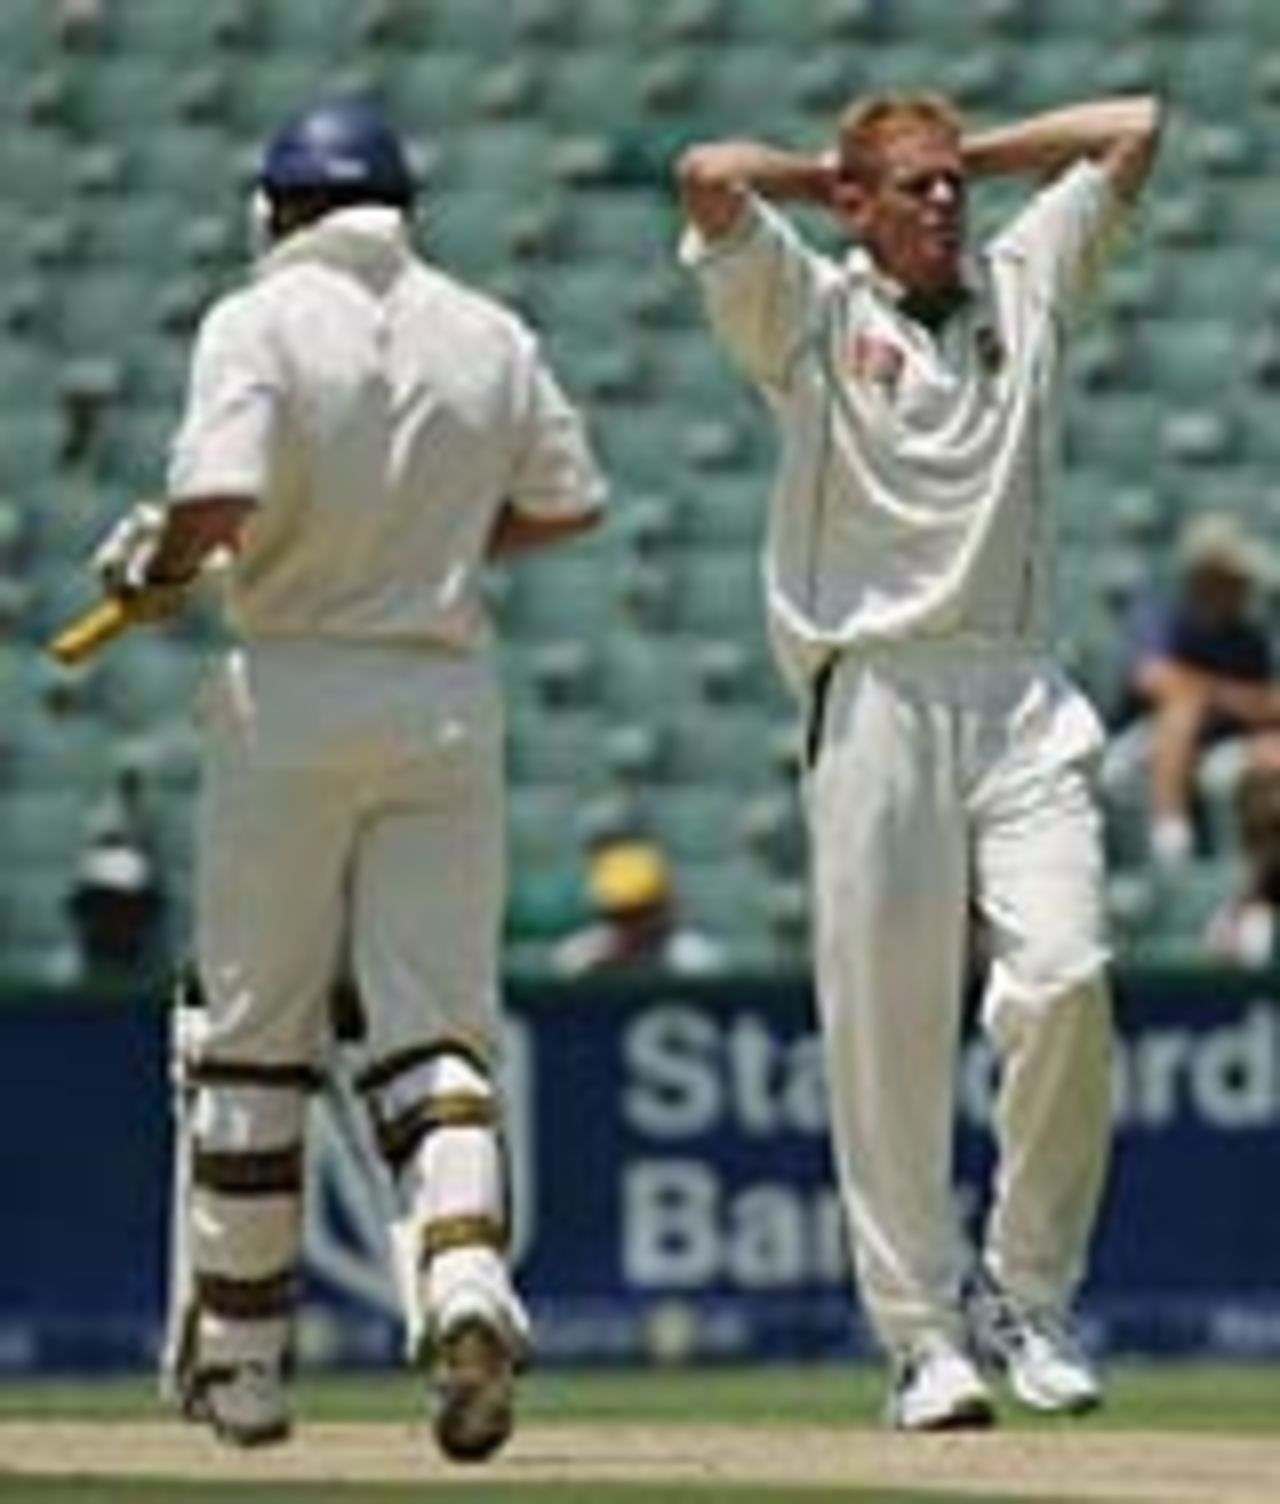 Andrew Strauss sees off Shaun Pollock, South Africa v England, 4th Test, Jo'burg, 1st day, January 13, 2005